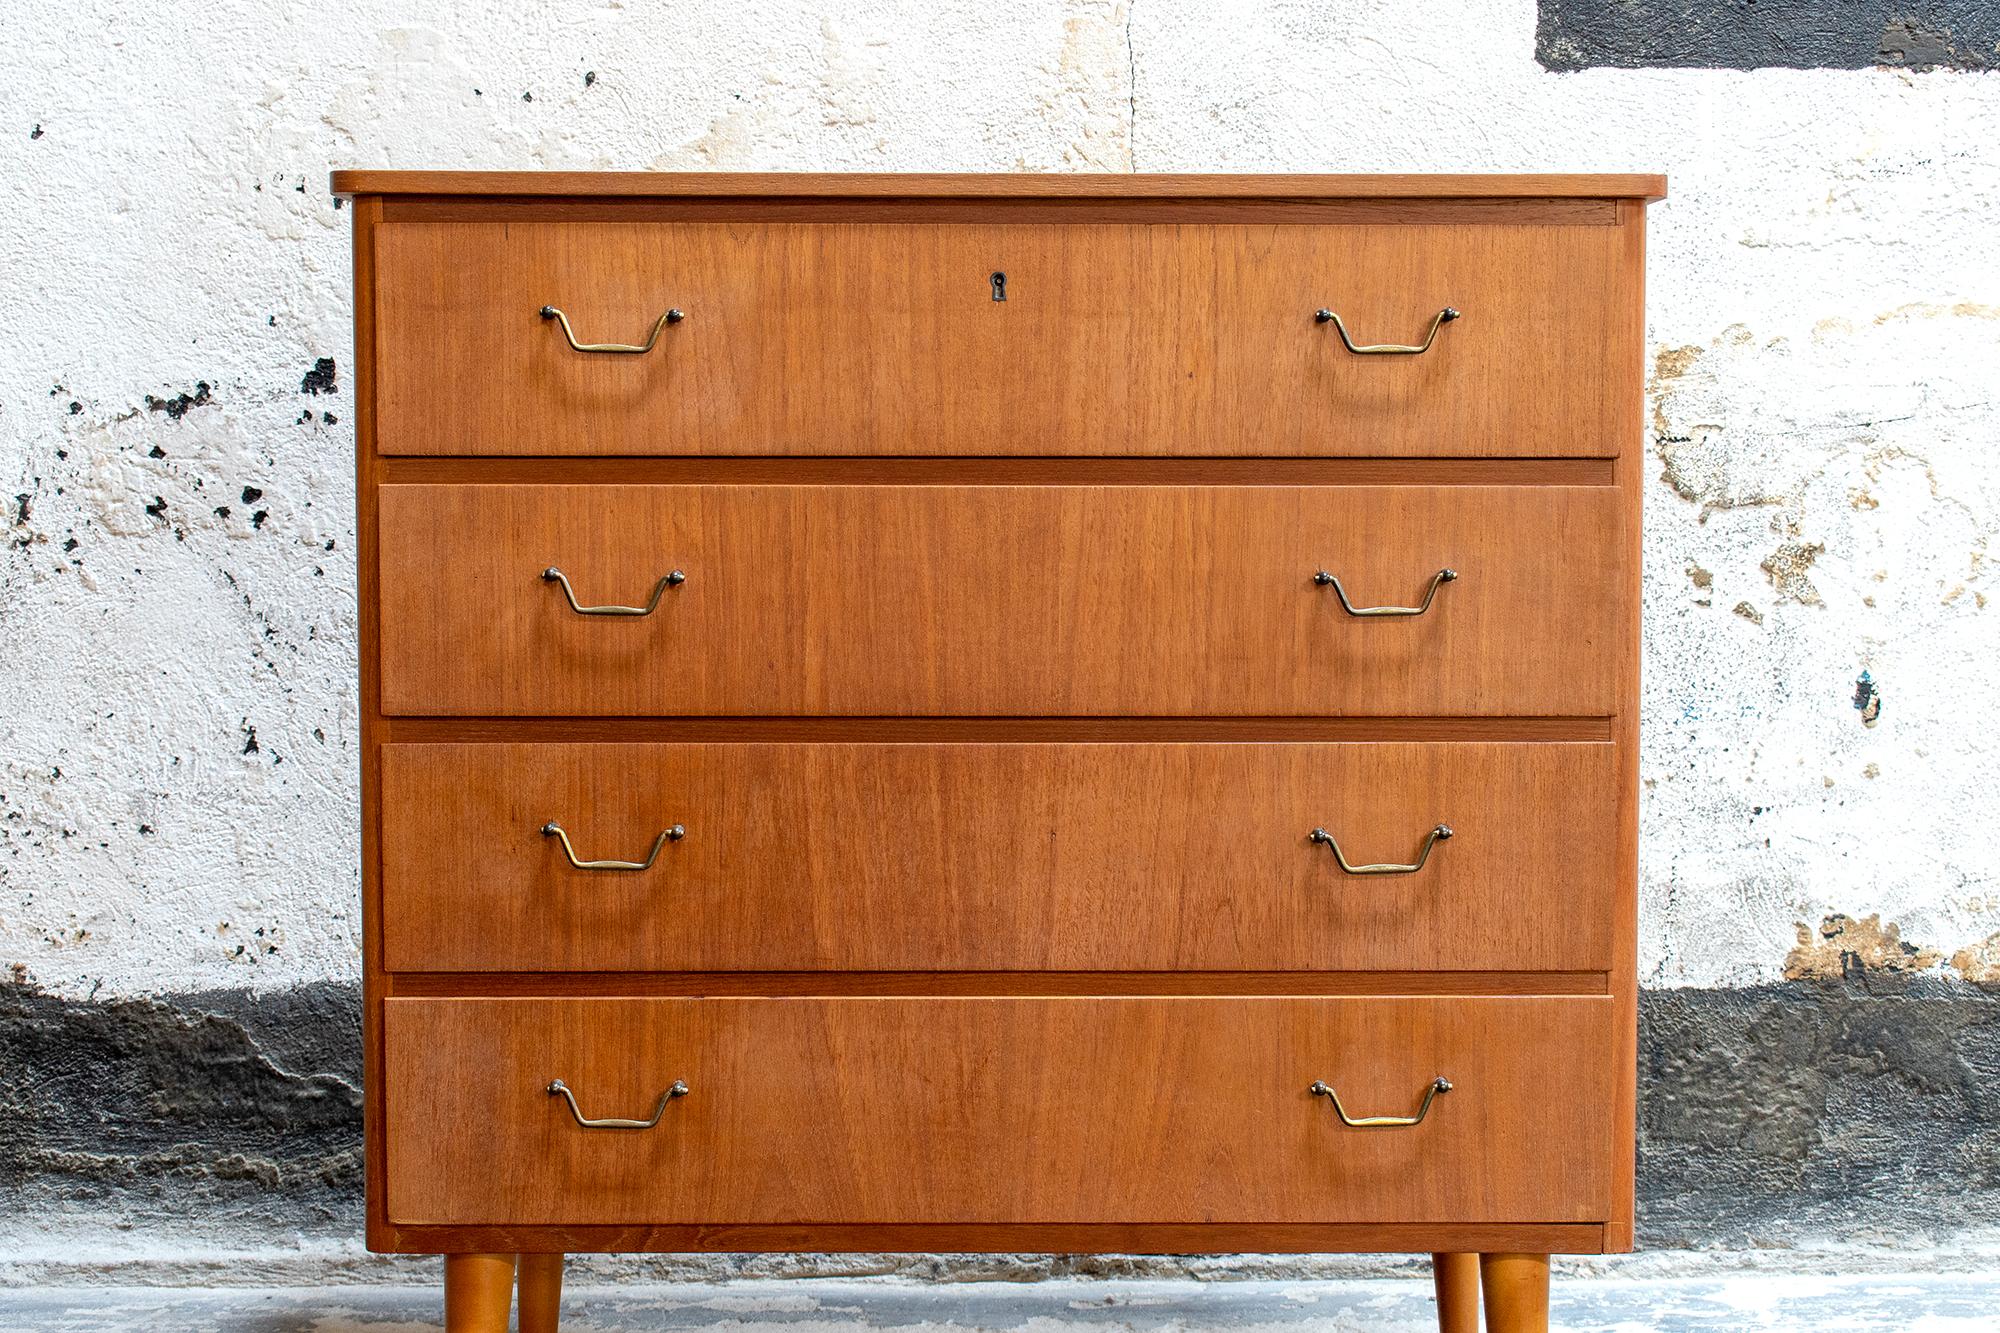 Handsome vintage chest of drawers from 1950s, Sweden. Crafted of rich teak, this piece features four ample - and easily workable - drawers with original hardware and sleek tapered legs. Perfect as a dresser, end table, nightstand or console. Very